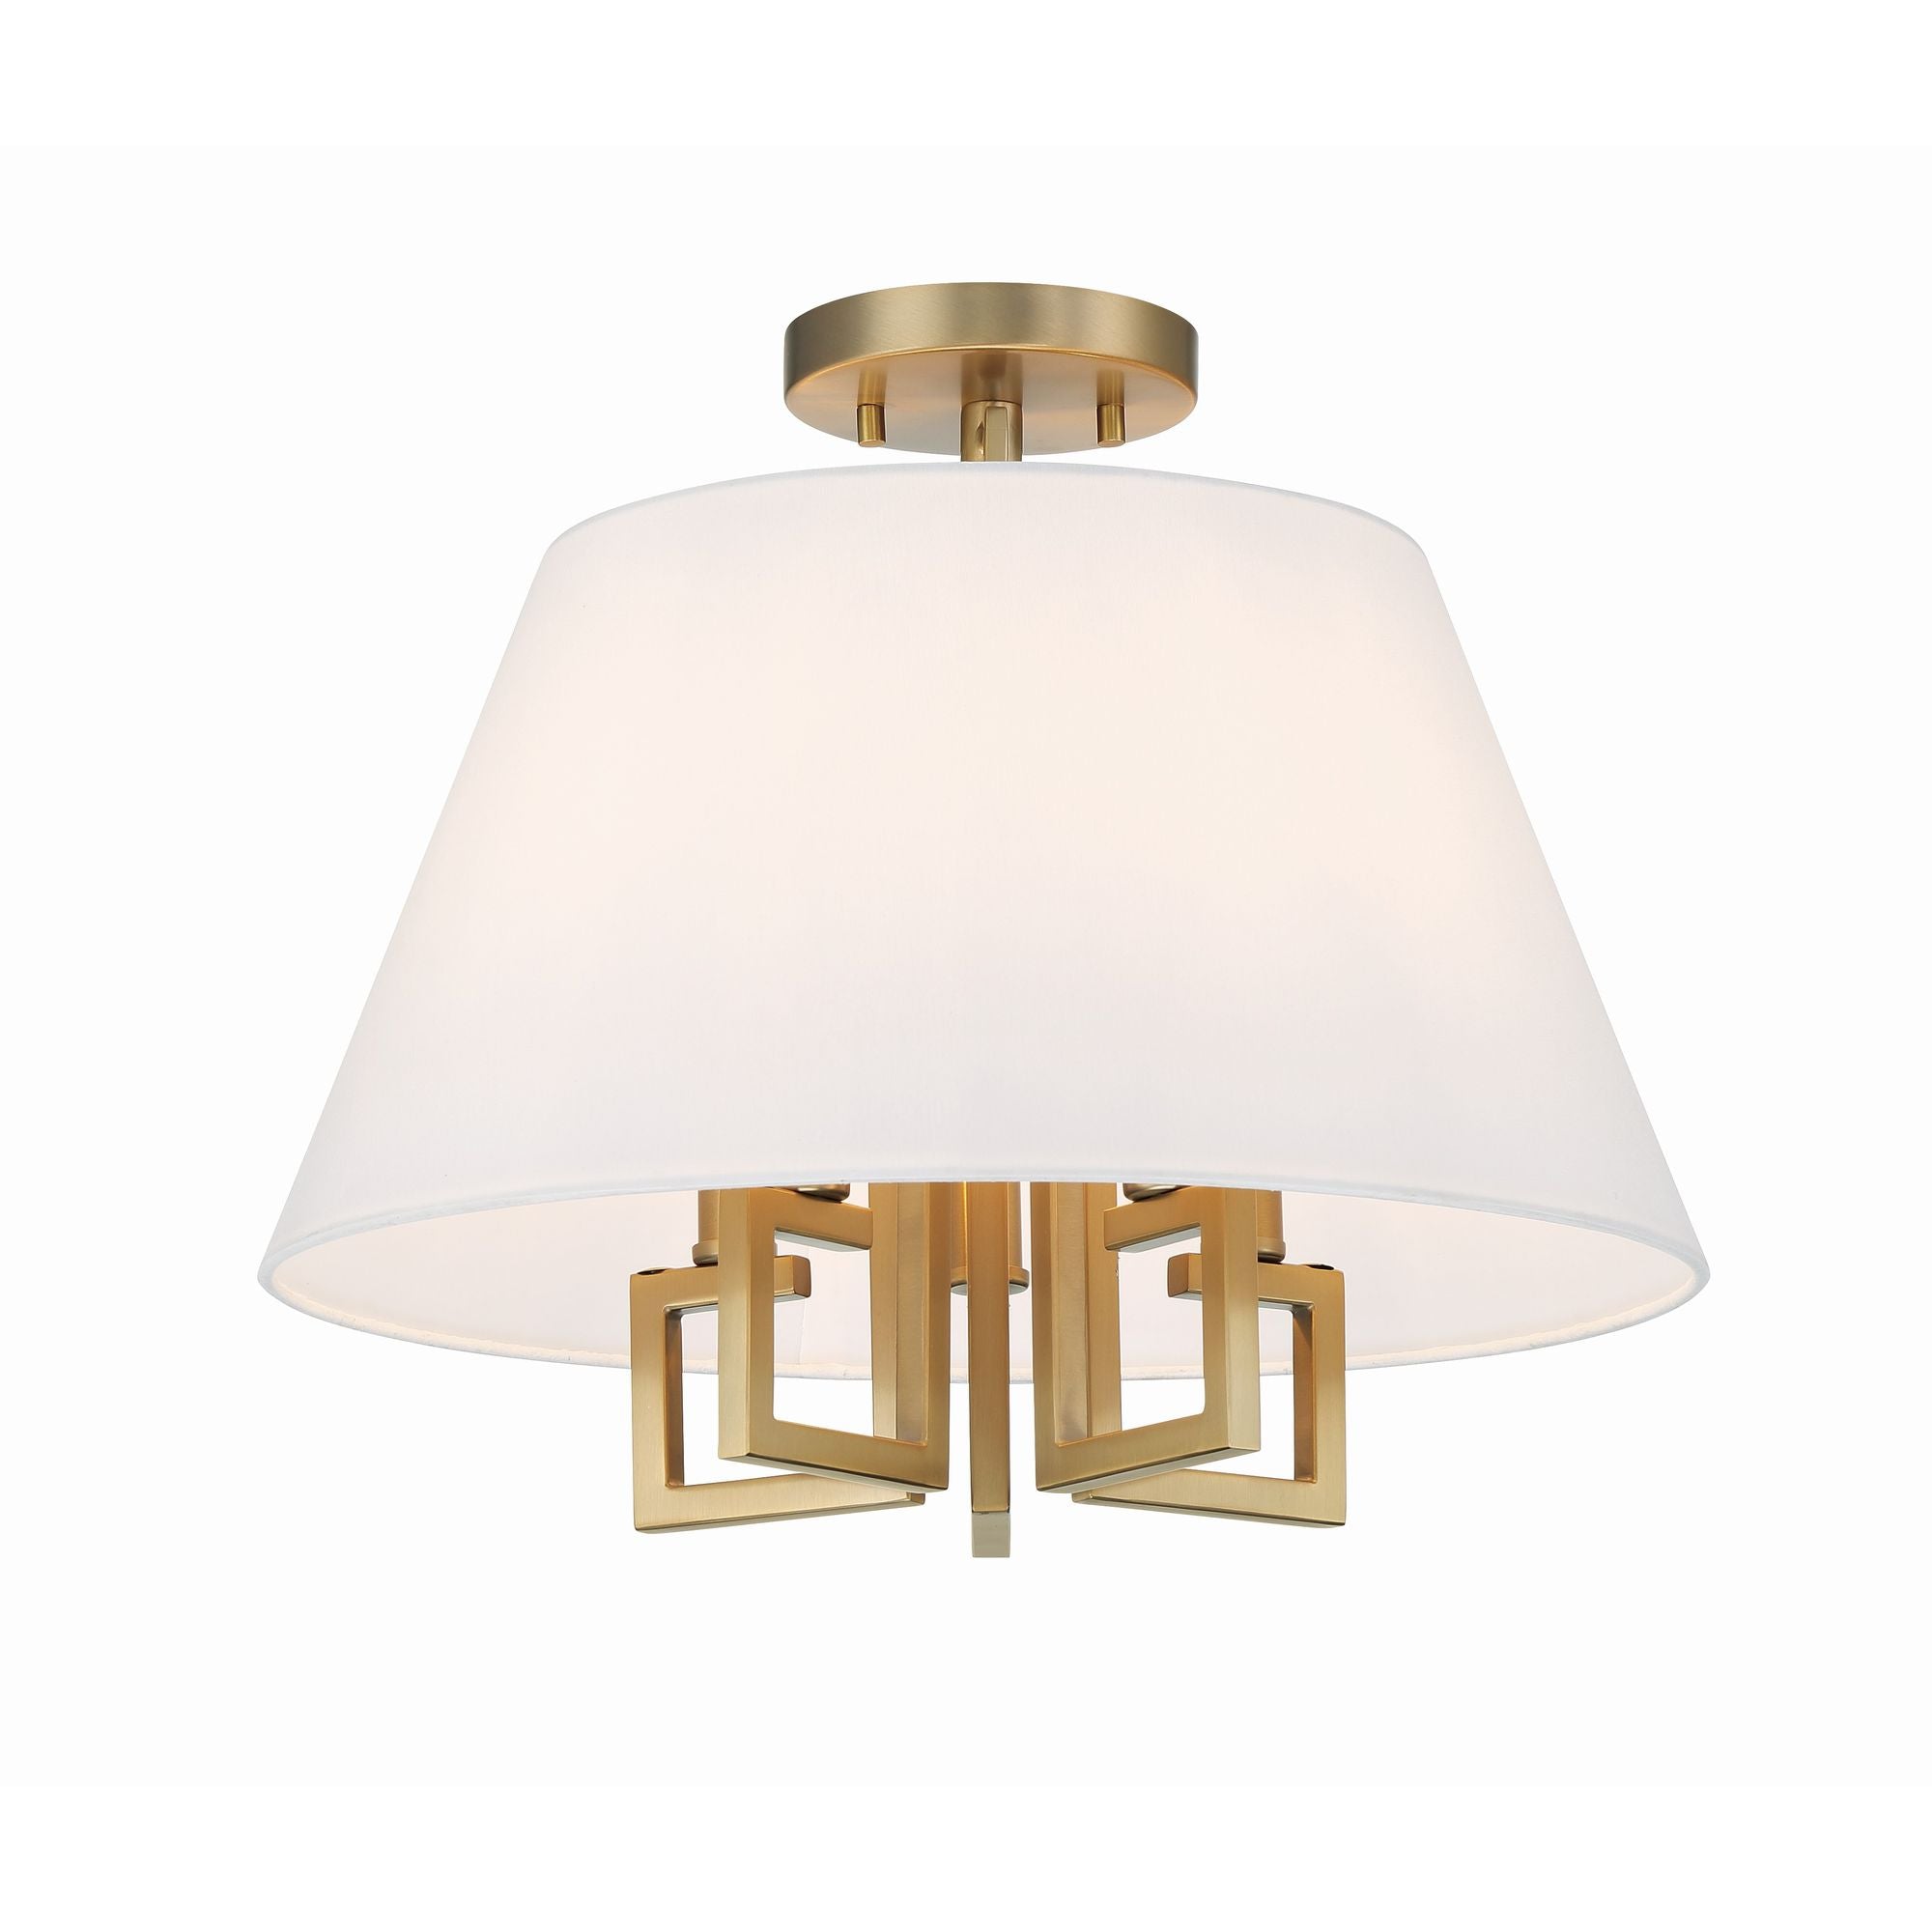 Libby Langdon for Crystorama Westwood 5 Light Vibrant Gold Ceiling Mount